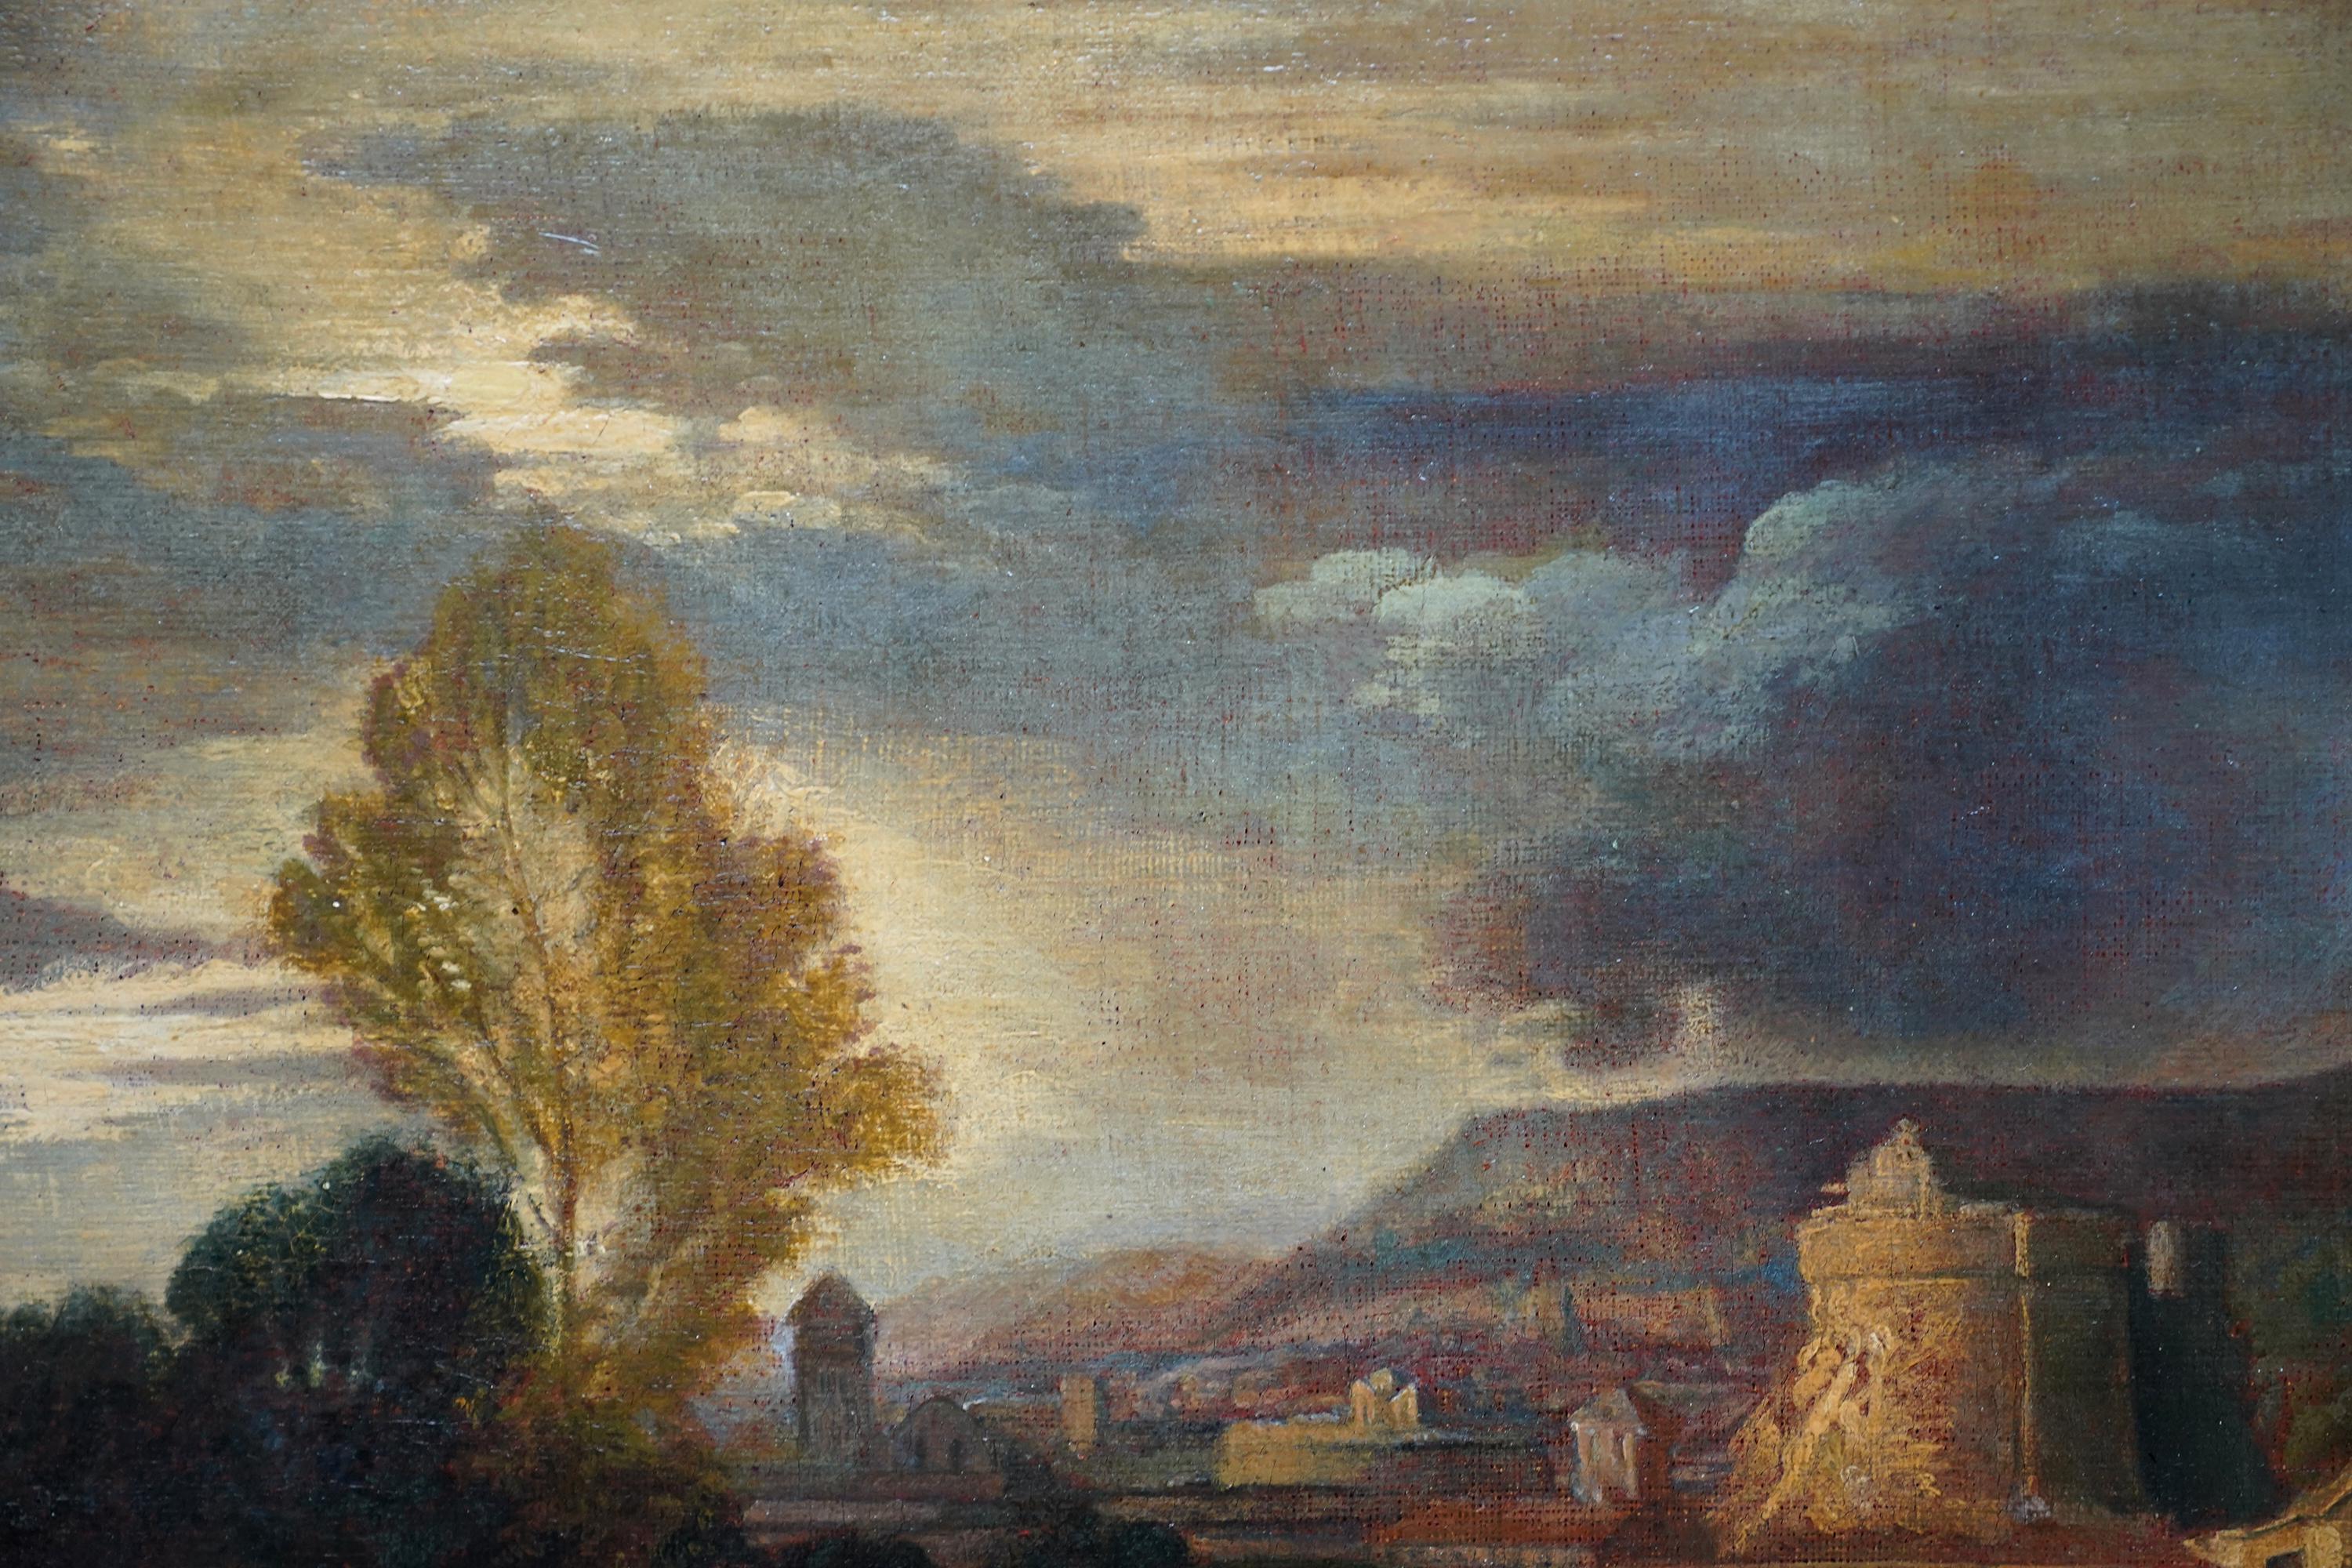 This superb 17th century French Old Master oil painting is attributed to Jean Francois Millet. Painted circa 1670 it is a classical landscape with figures by a bend in a river in the foreground. Beyond are various buildings with green hills behind